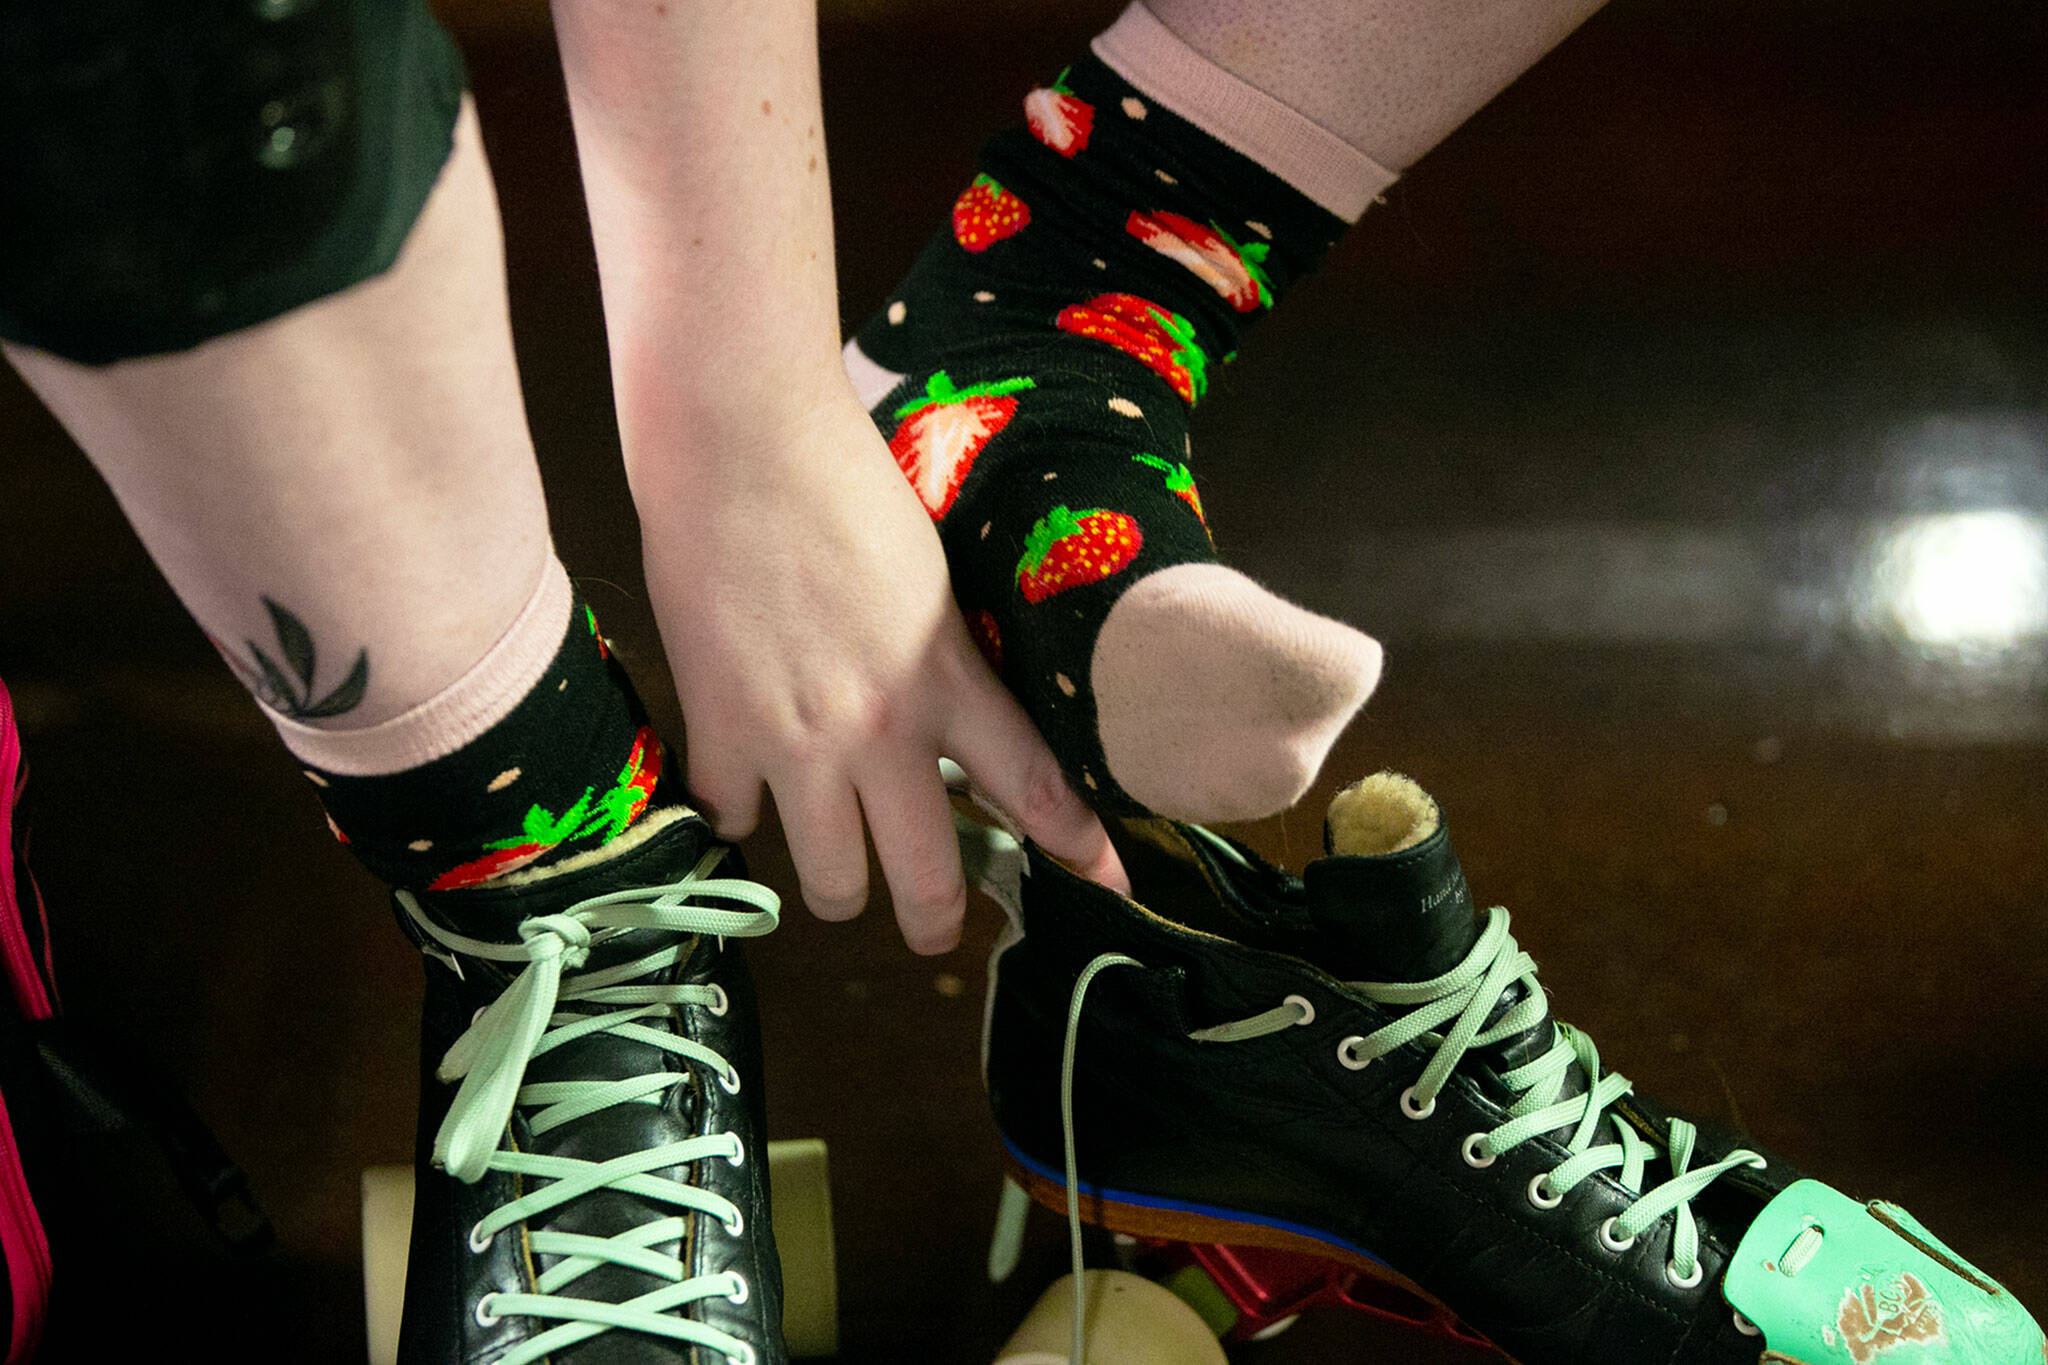 “Rina Rock You” Marina Kolbeck dons strawberry socks while putting on gear during a Strawberry City Roller Derby practice at Marysville Skate Center on Monday, Feb. 6, in Marysville. (Ryan Berry / The Herald)